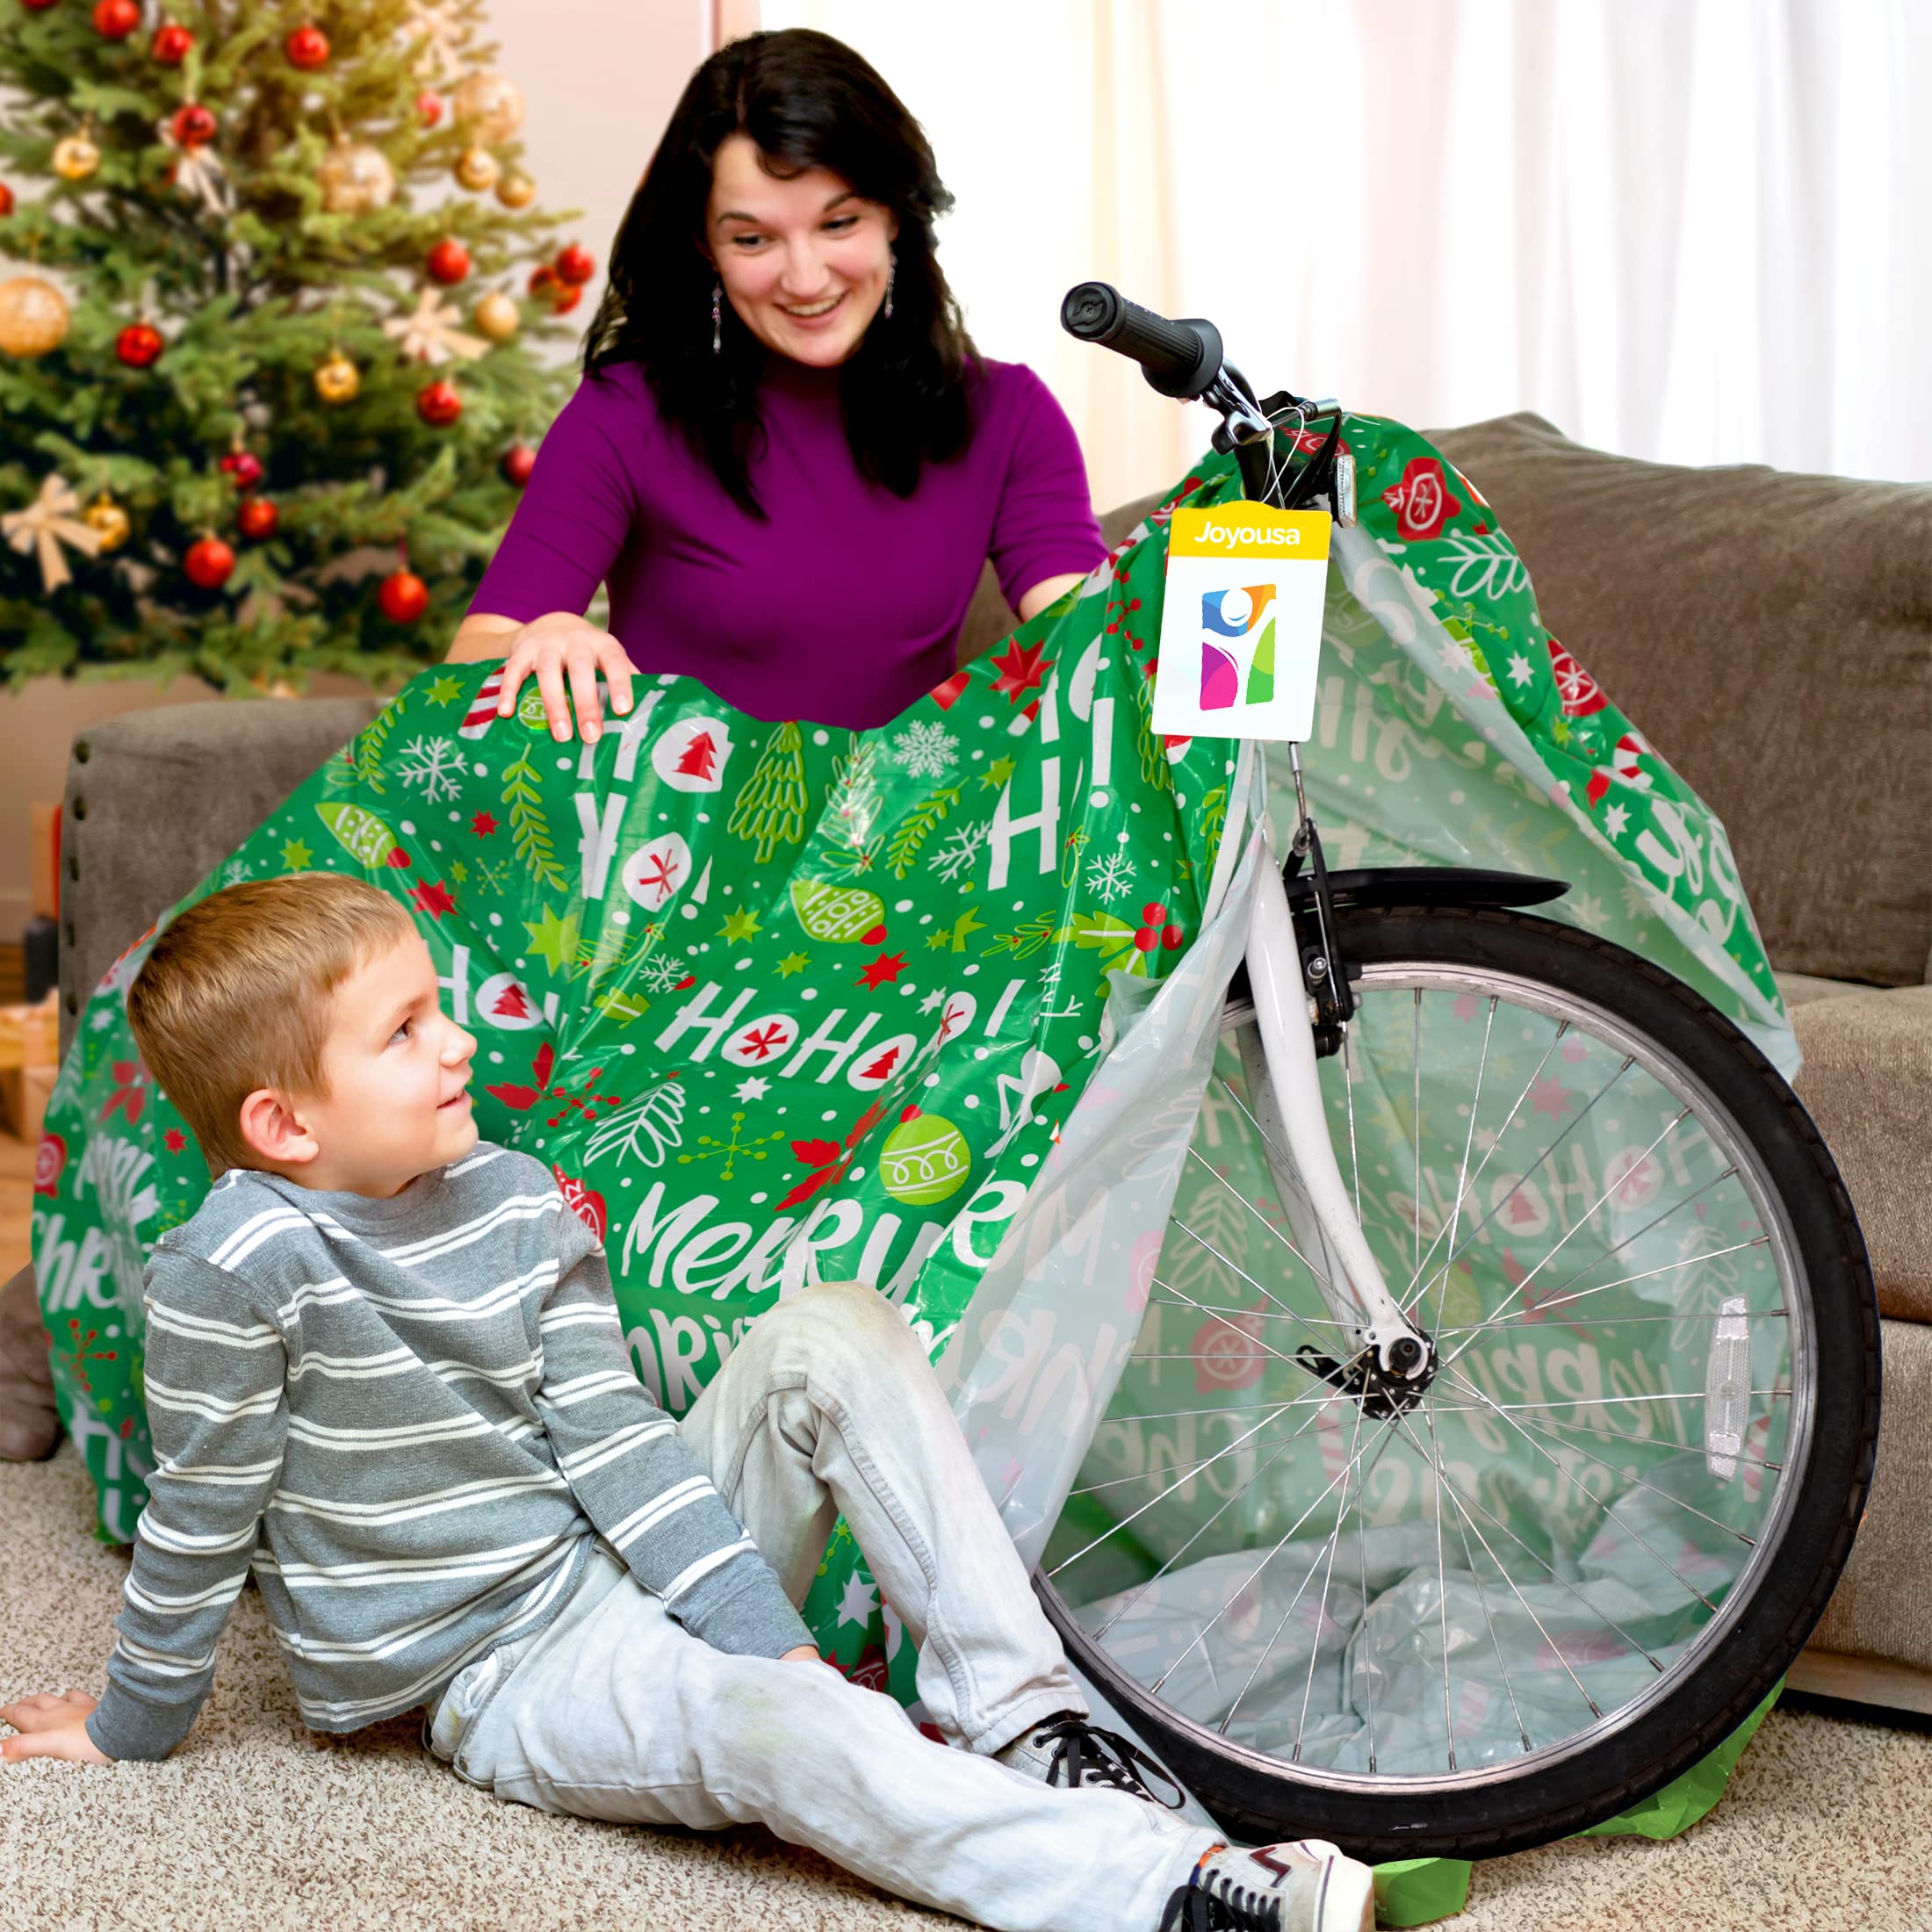 Bike Gift Bag 2 Pack - Giant Christmas Gift Bags for Huge Gifts - 72”x60” Bicycle Oversized Jumbo Extra Large Xmas Present Gift Bags Plastic Wrapping Sack - Heavy Duty Pack with Tags & String Ties